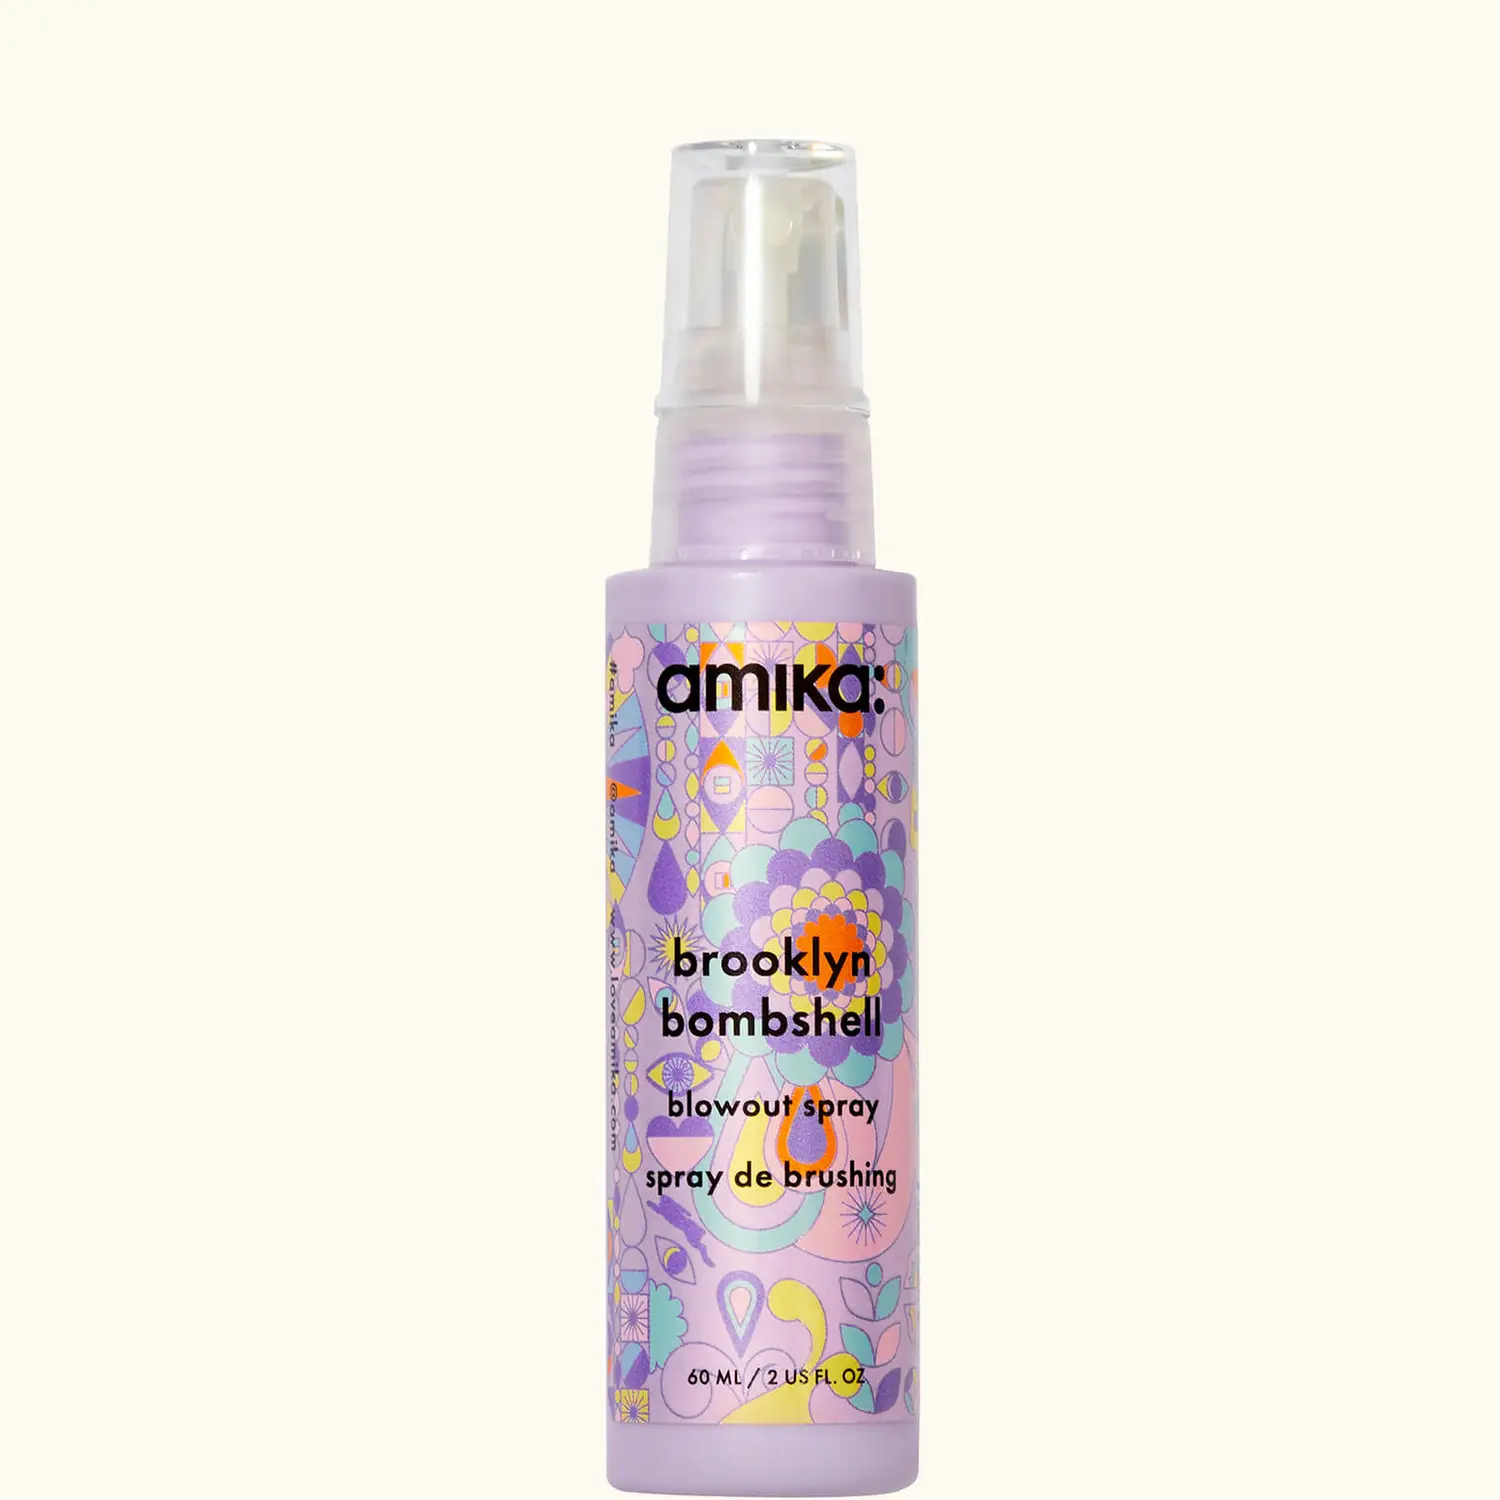 Get a Brooklyn bombshell blowout spray (60ml) when you spend £100 at Amika